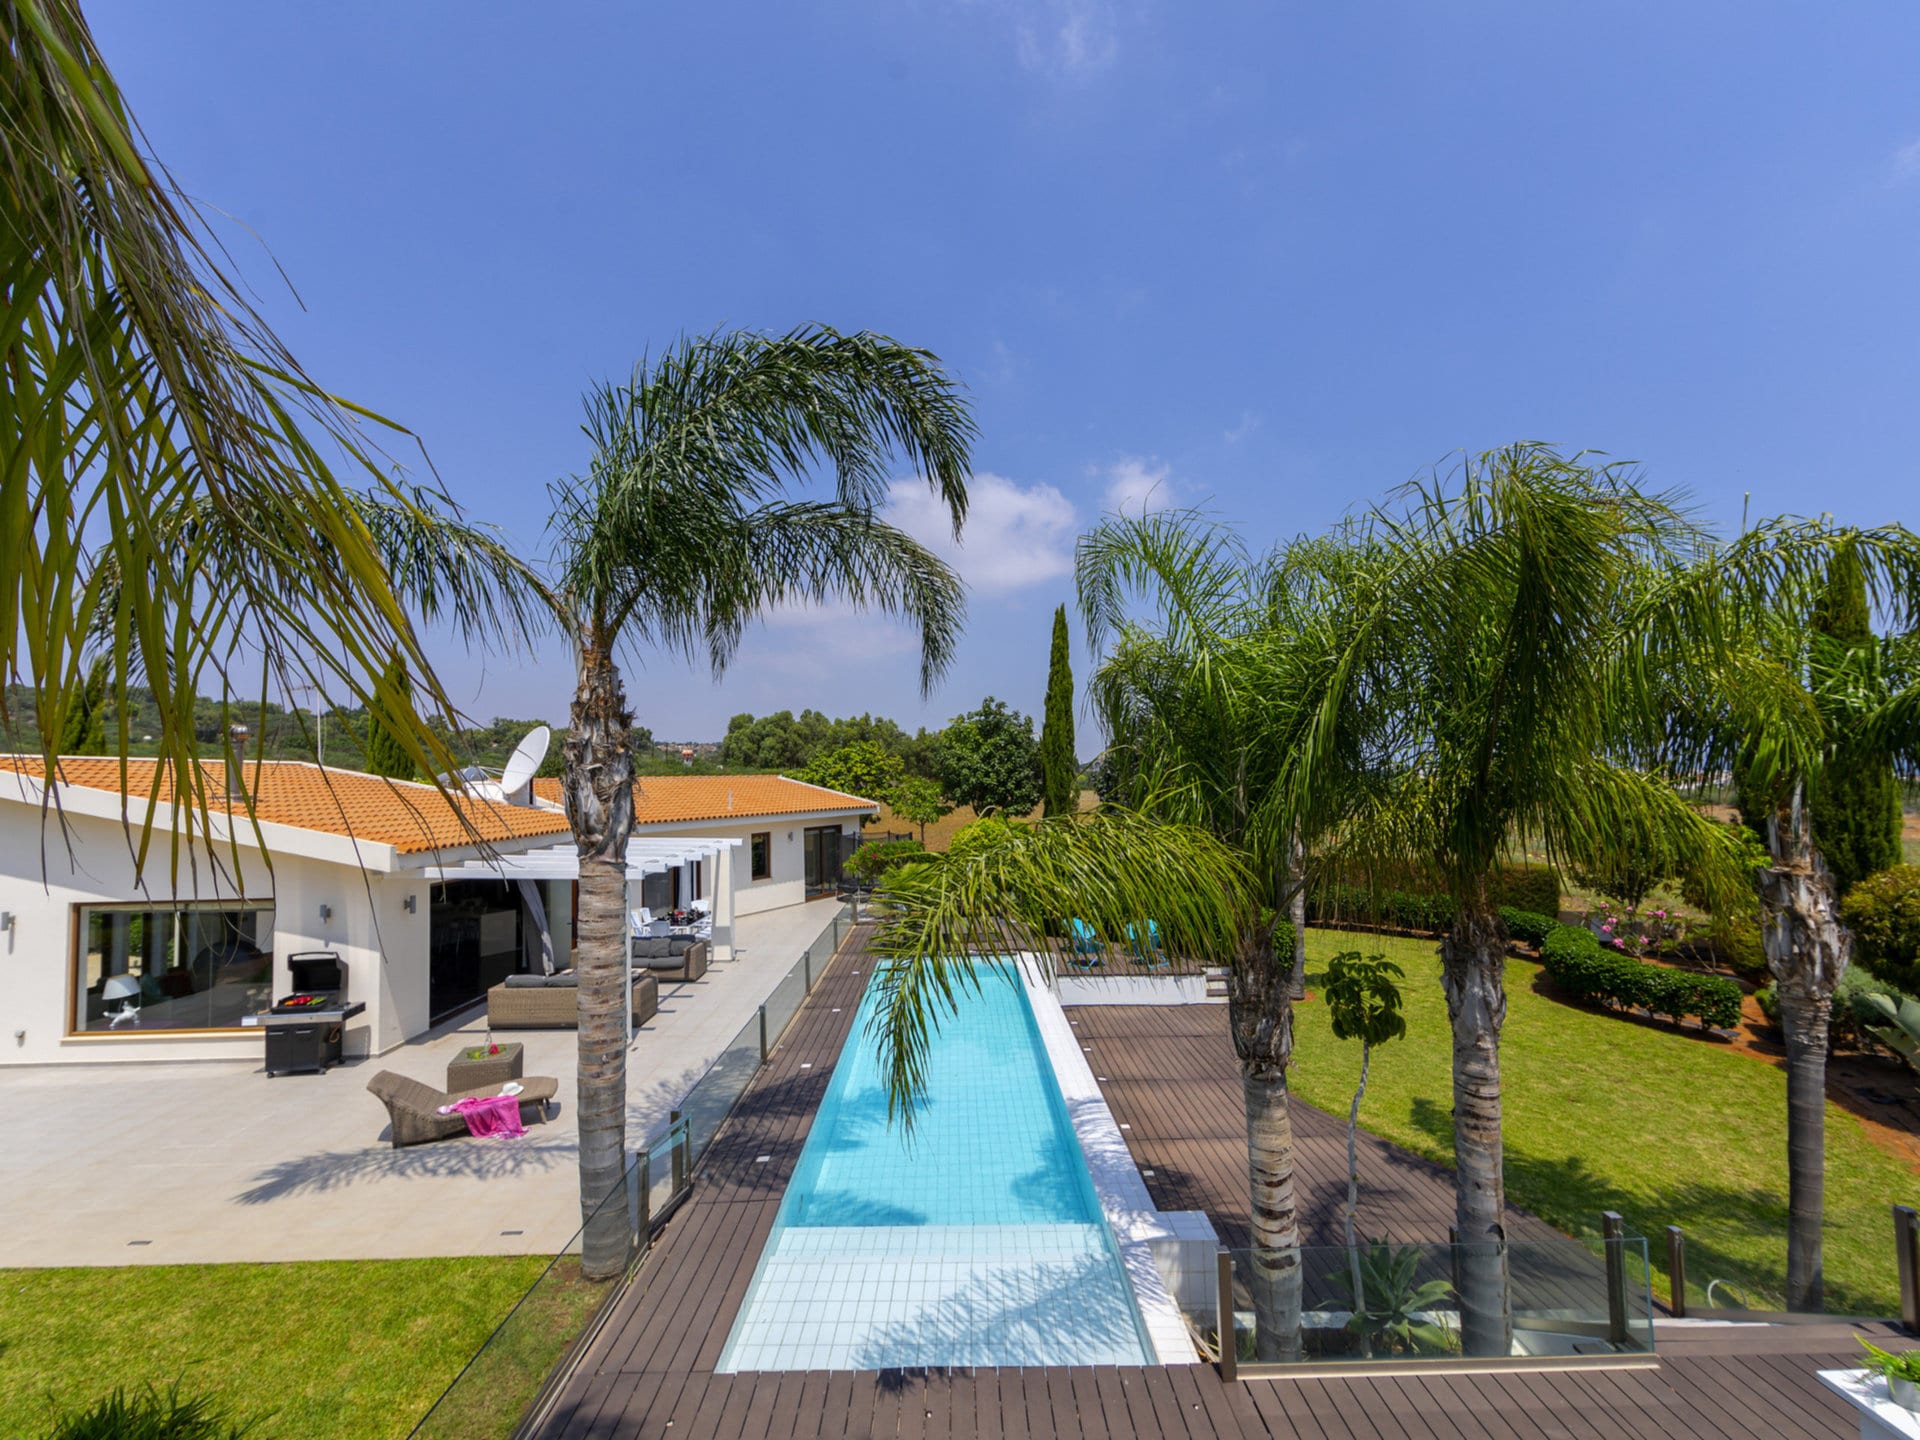 Property Image 2 - At Last You can Rent the Perfect Luxury Villa in Protaras close to all the action, Protaras Villa 1569